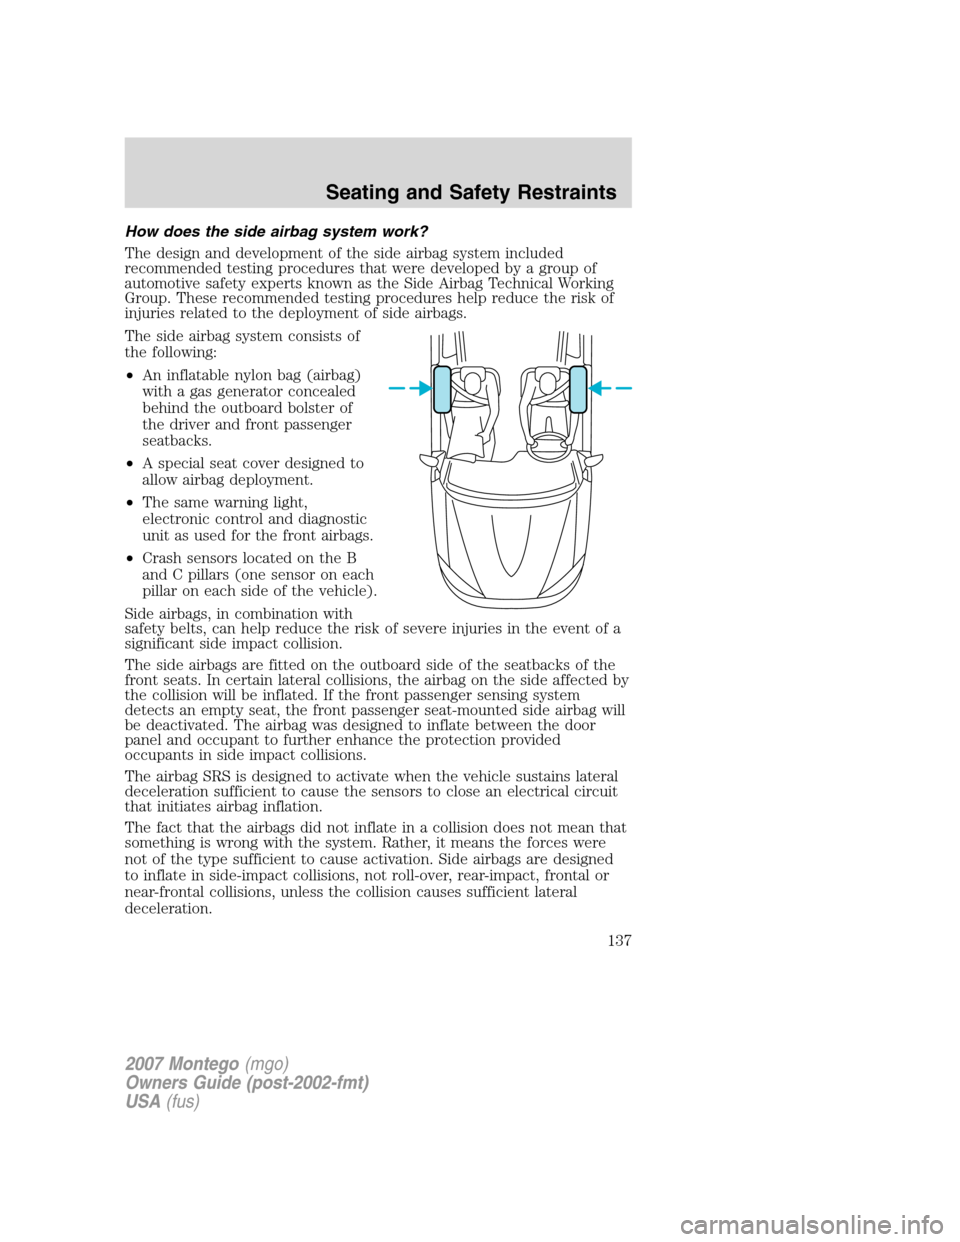 Mercury Montego 2007  Owners Manuals How does the side airbag system work?
The design and development of the side airbag system included
recommended testing procedures that were developed by a group of
automotive safety experts known as 